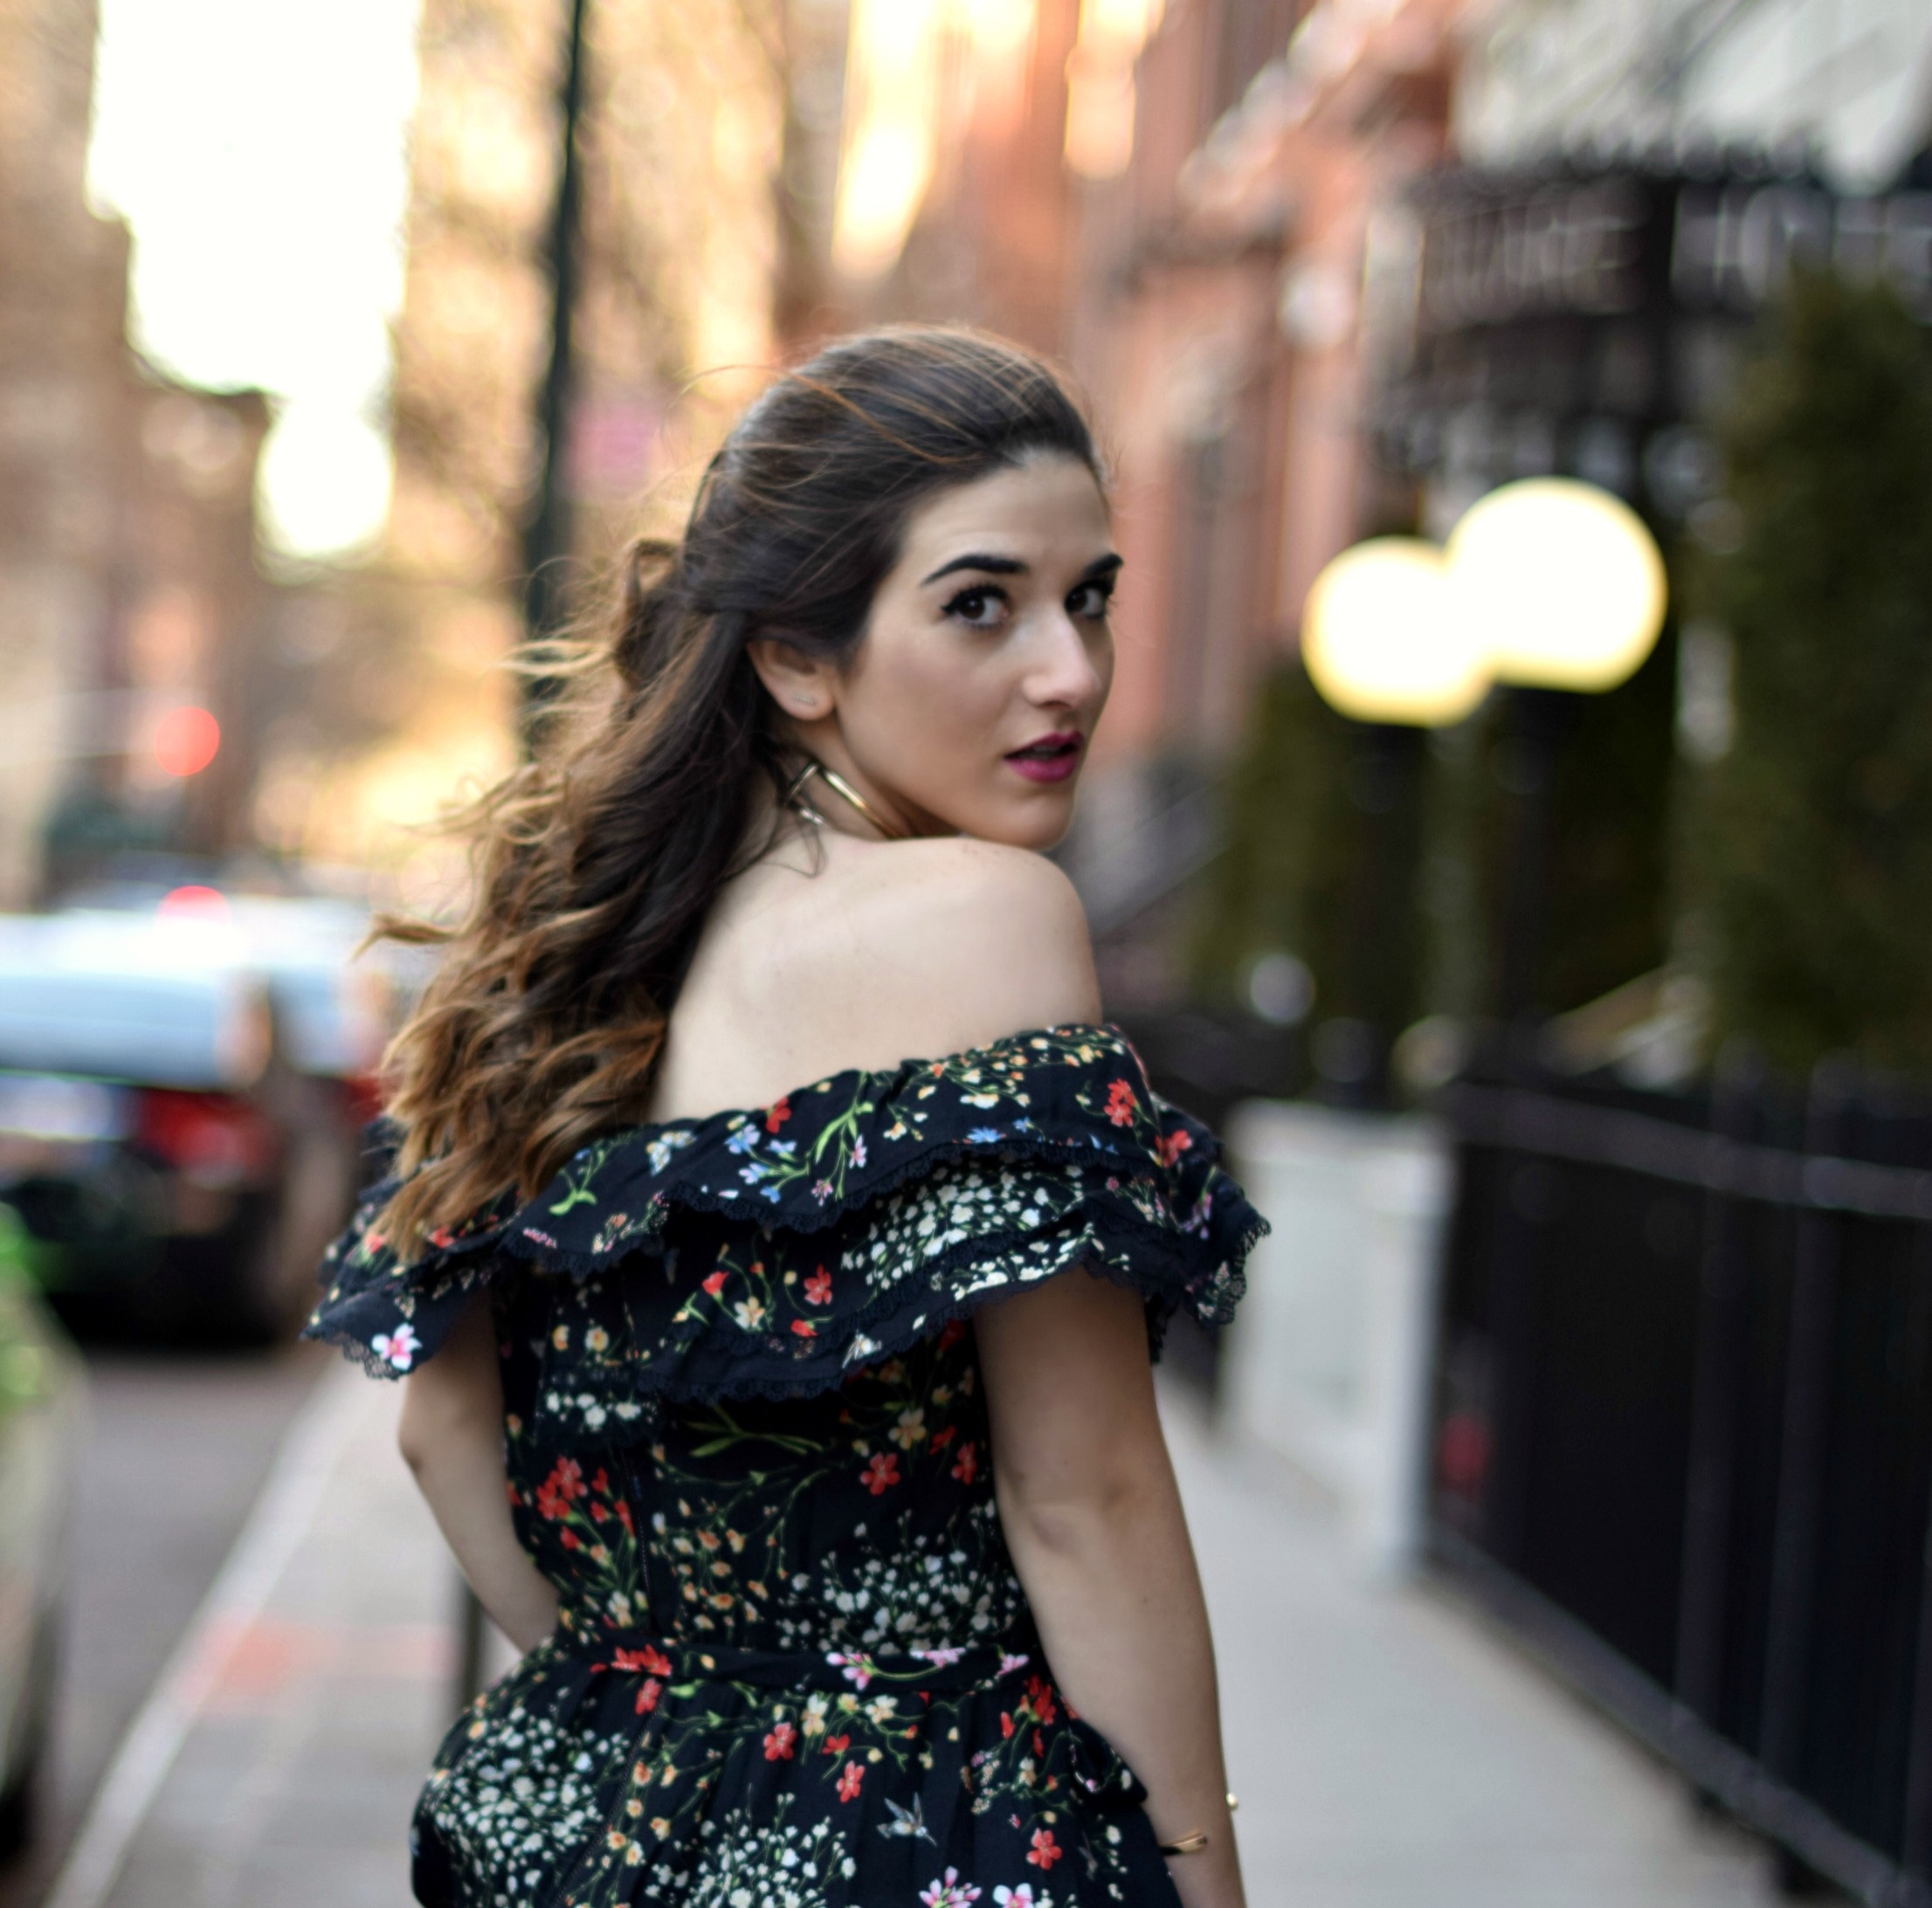 Alice Olivia Floral Dress Louboutins & Love Fashion Blog Esther Santer NYC Street Style Blogger Outfit OOTD Trunk Club Lydell Hair Brunette Model New York City Photoshoot Spring Summer Choker Gold Bracelet Jewelry Pretty Beautiful Inspo Shoulder Shoes.jpg